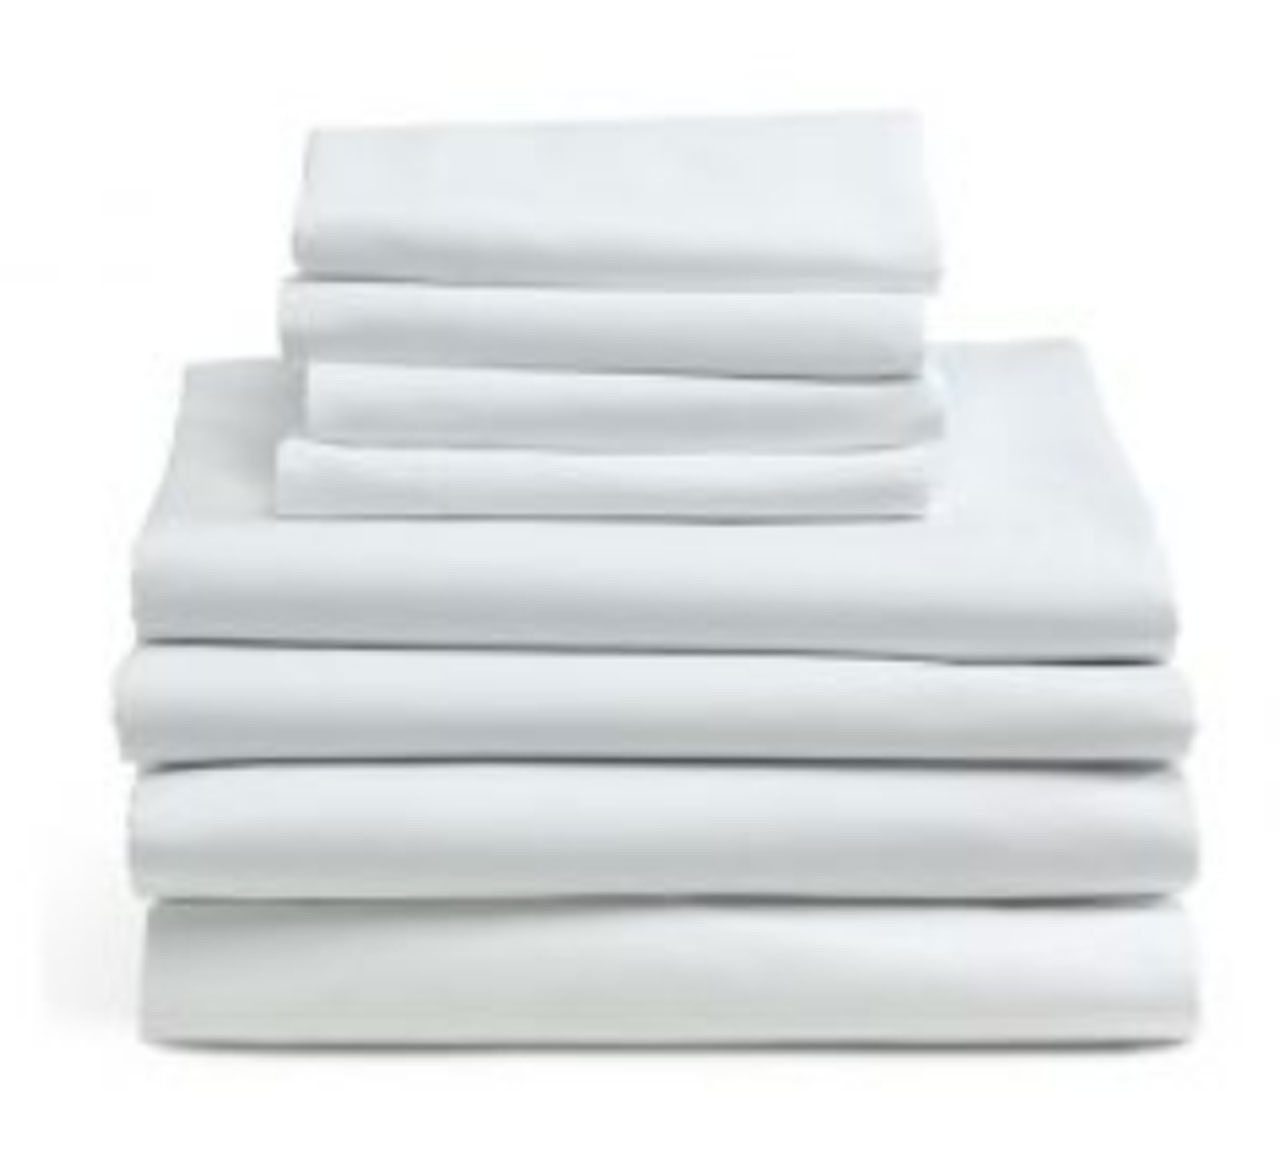 What material is the Royal Star wholesale T-180 Hospitality Bed Sheets and pillowcases made of?